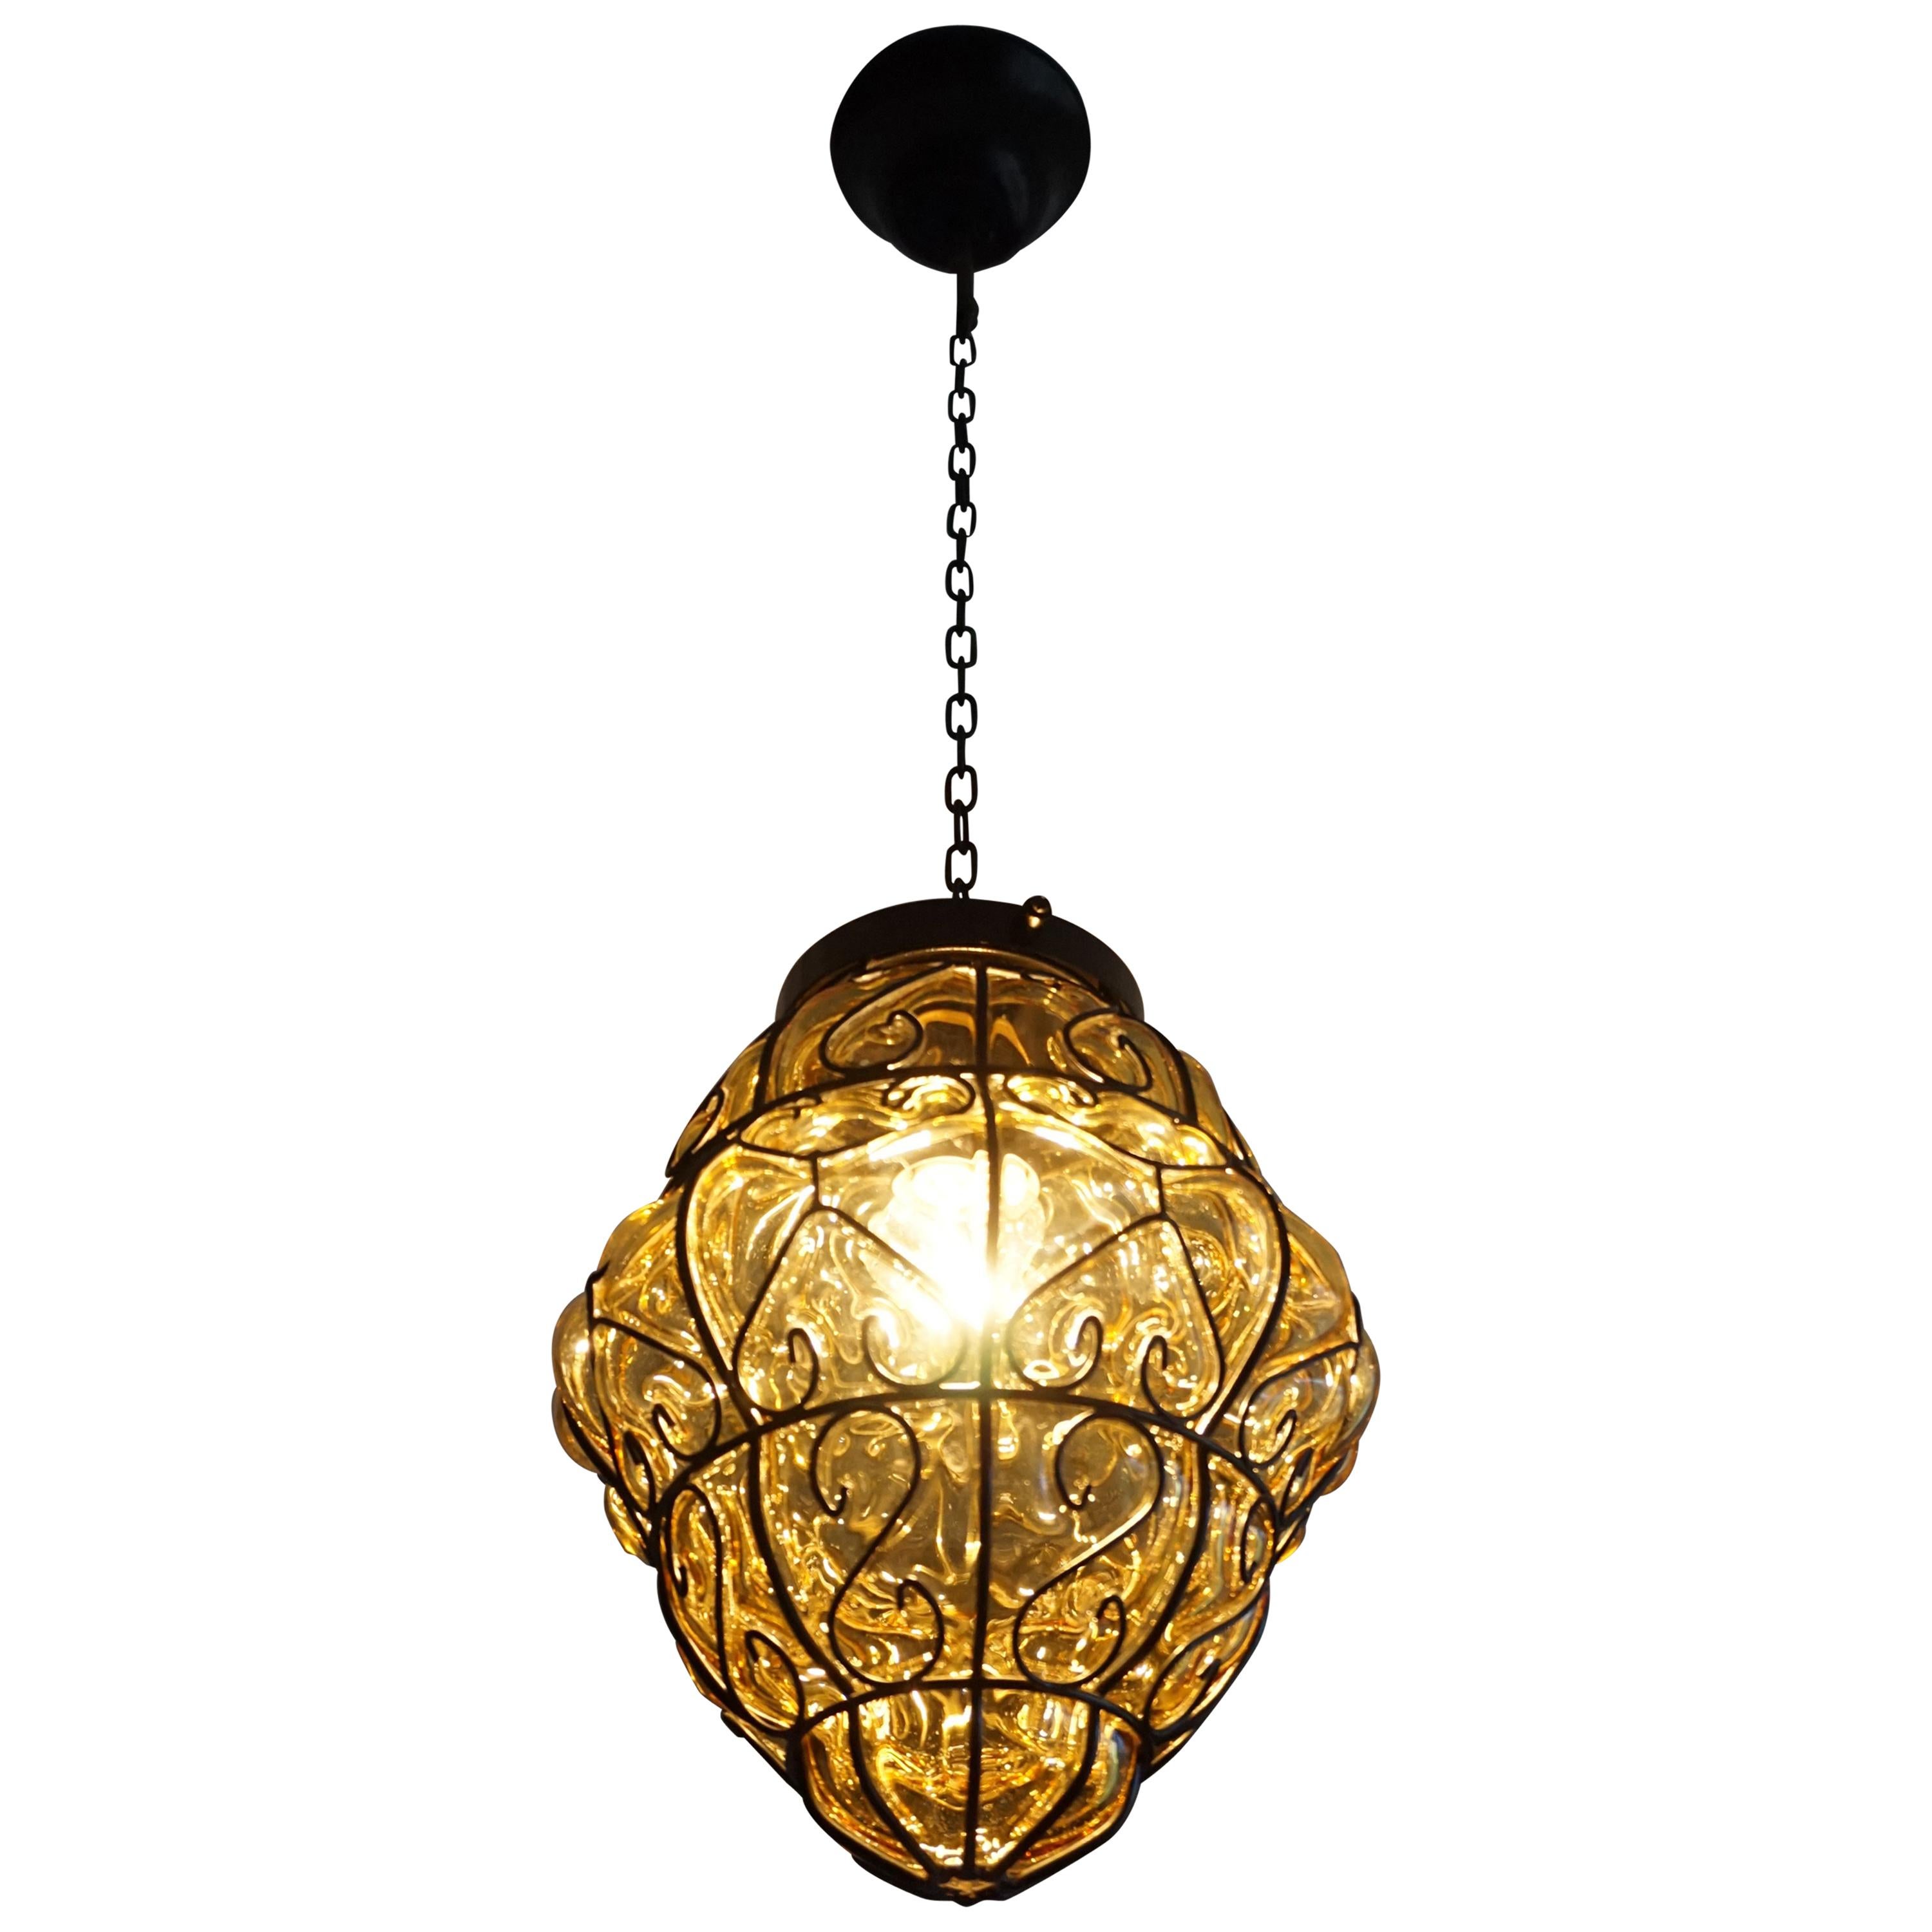 Midcentury Mouth Blown Amber Glass in Wrought Iron Frame Pendant Light Fixture